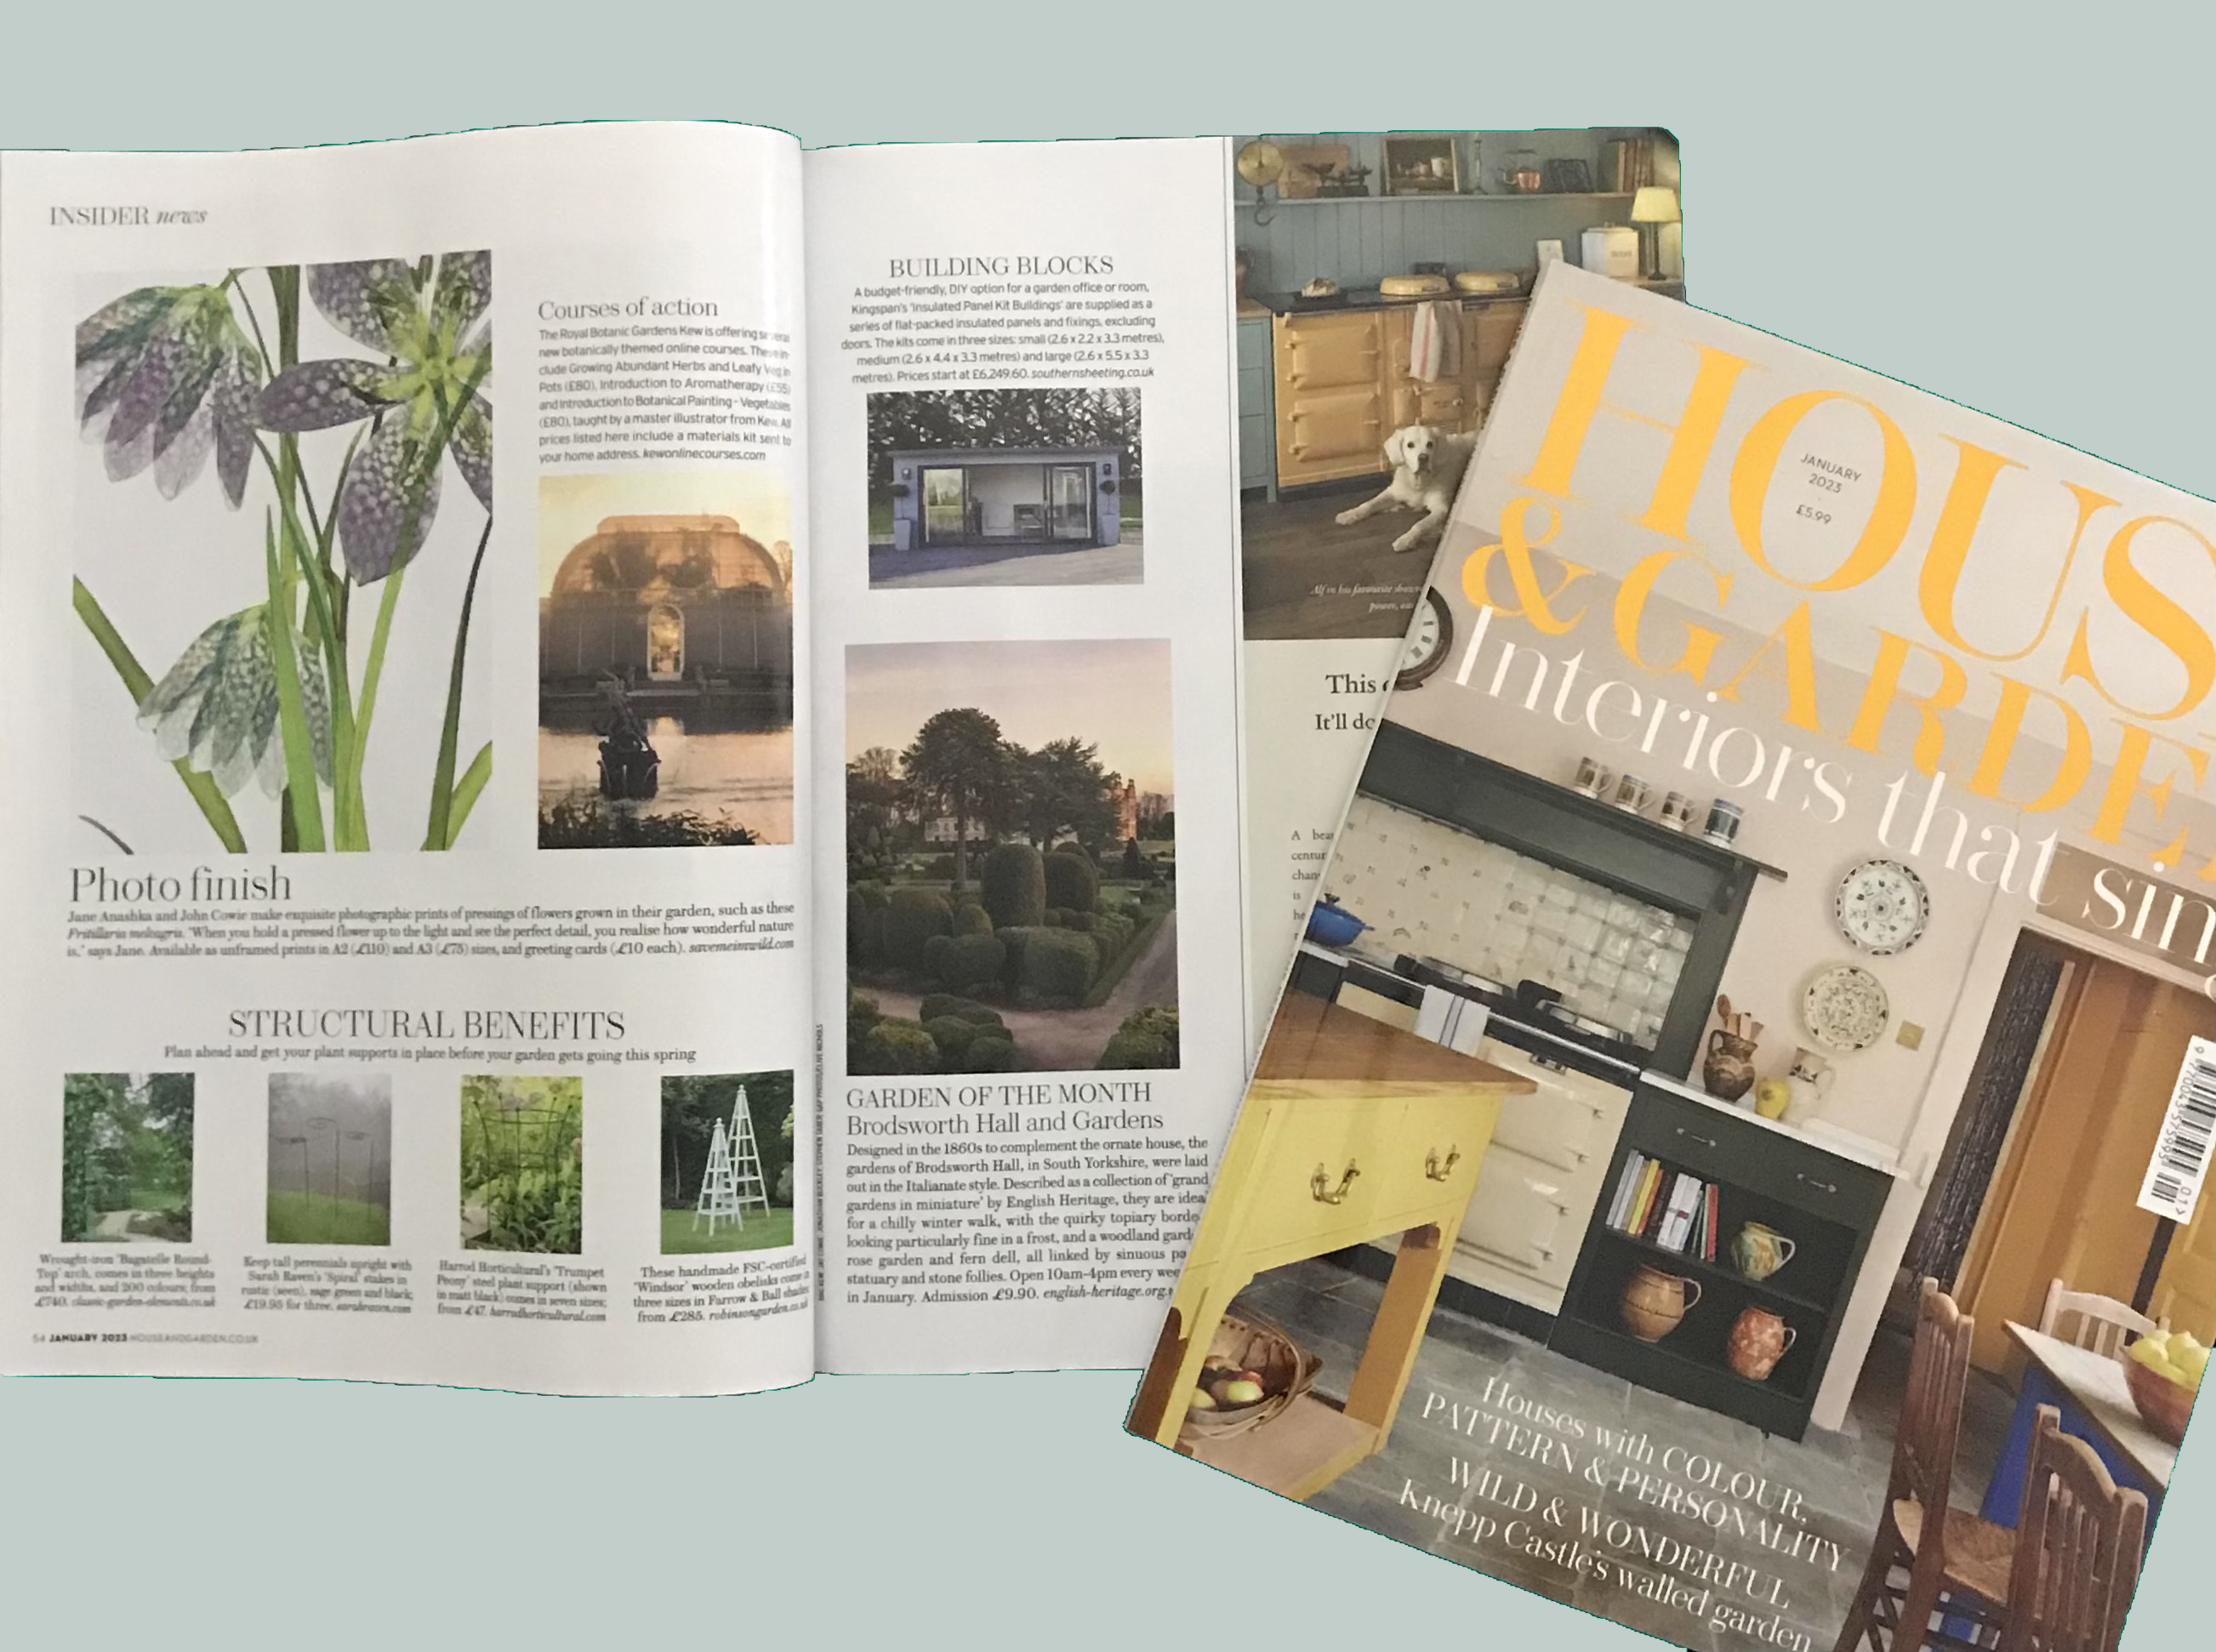 Fritillaria image featured in H&G January issue